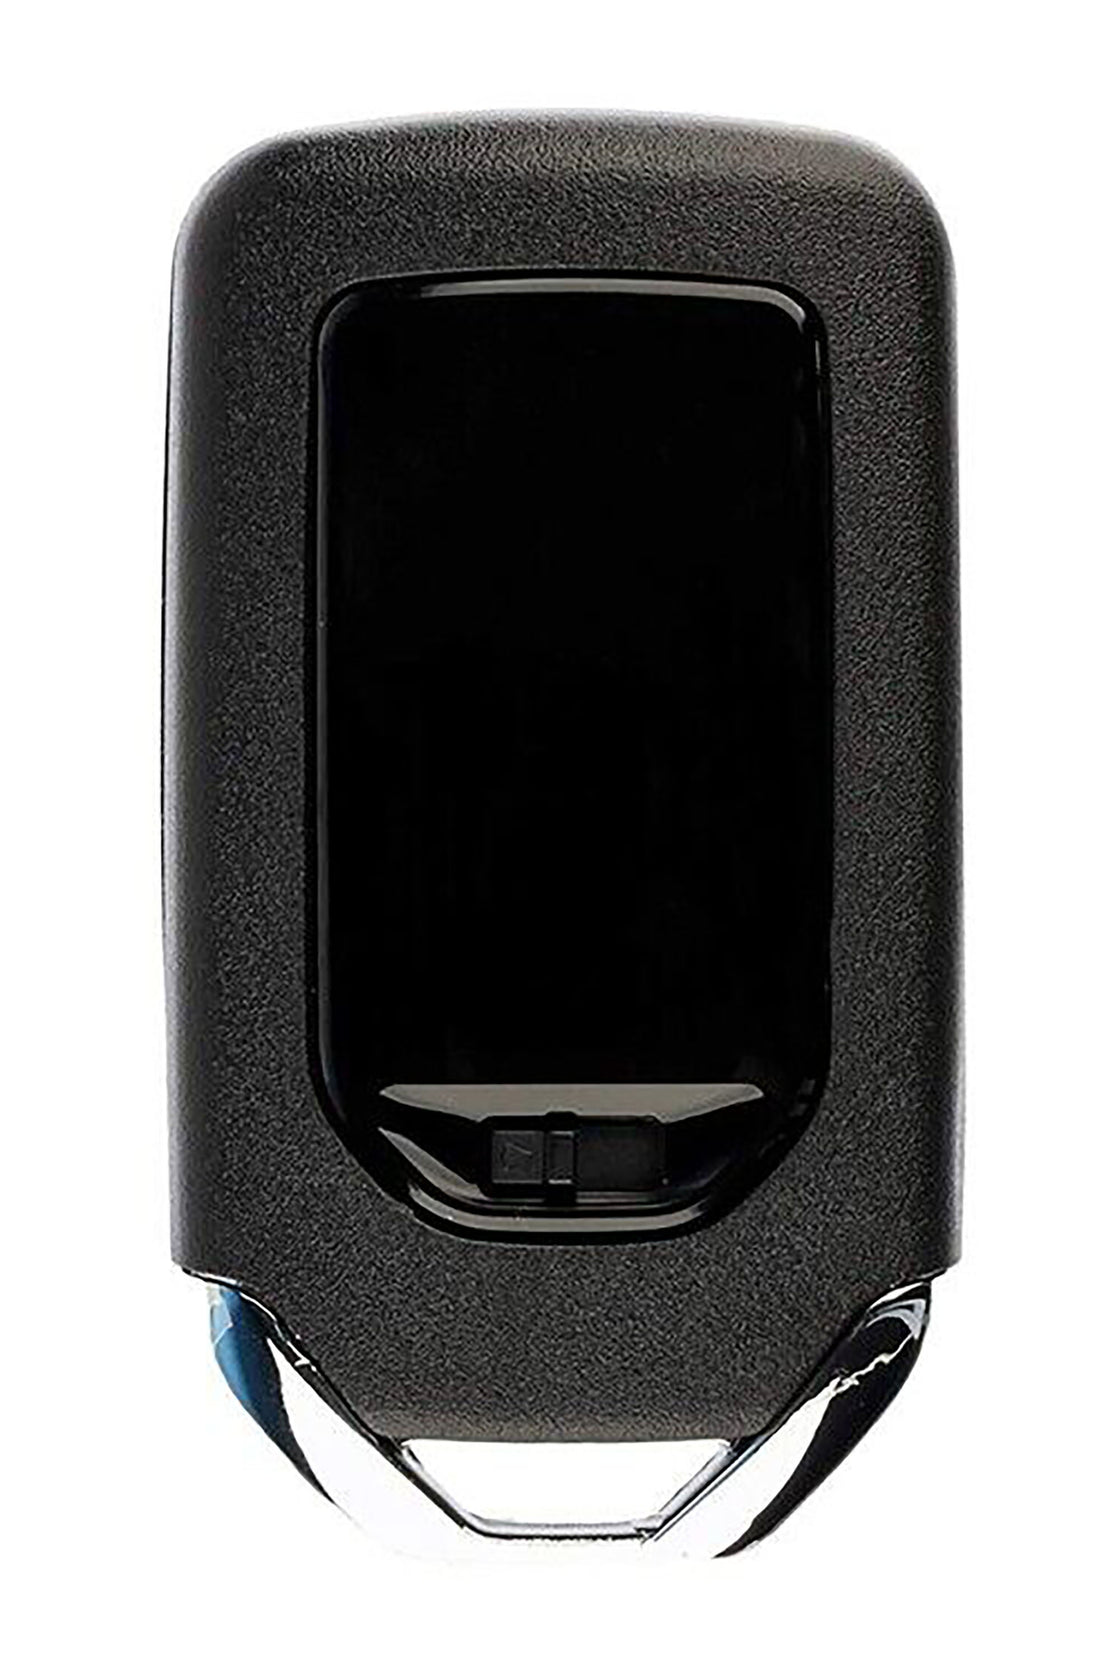 1x New Replacement Proximity Remote Key Fob Compatible with & Fit For 2013-2015 HONDA CROSSTOUR - MPN ACJ932HK1210A-02